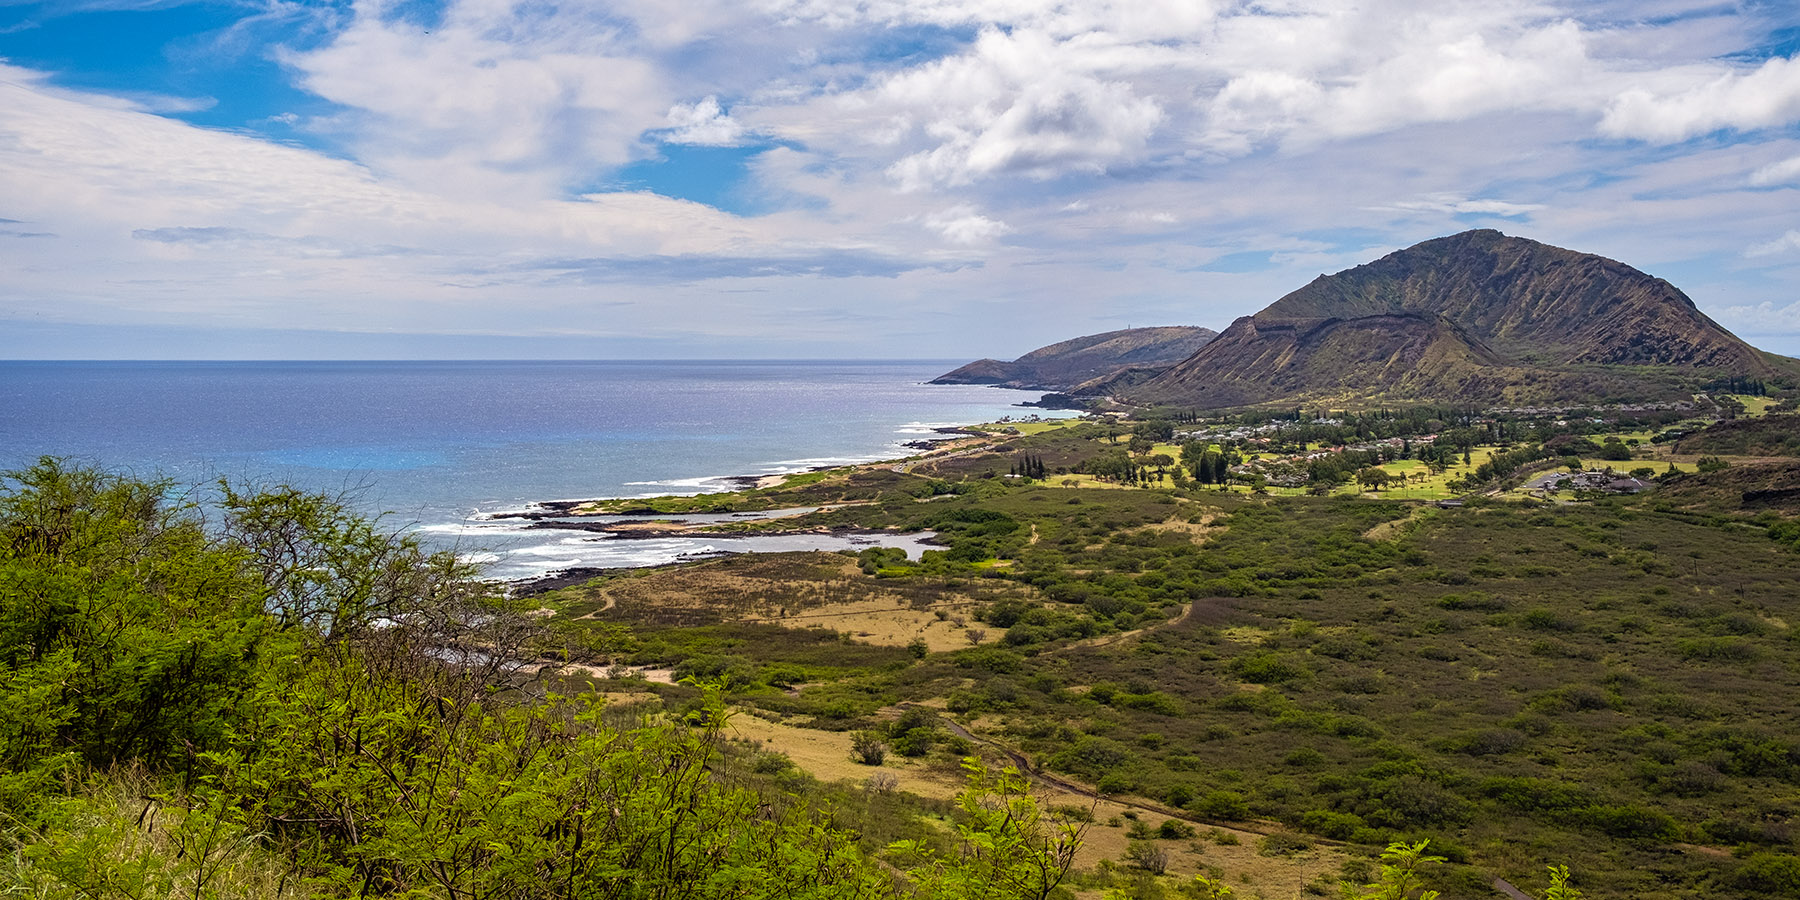 On the way up to Makapuʻu Point one has a great view of Koko Head and Koko Crater